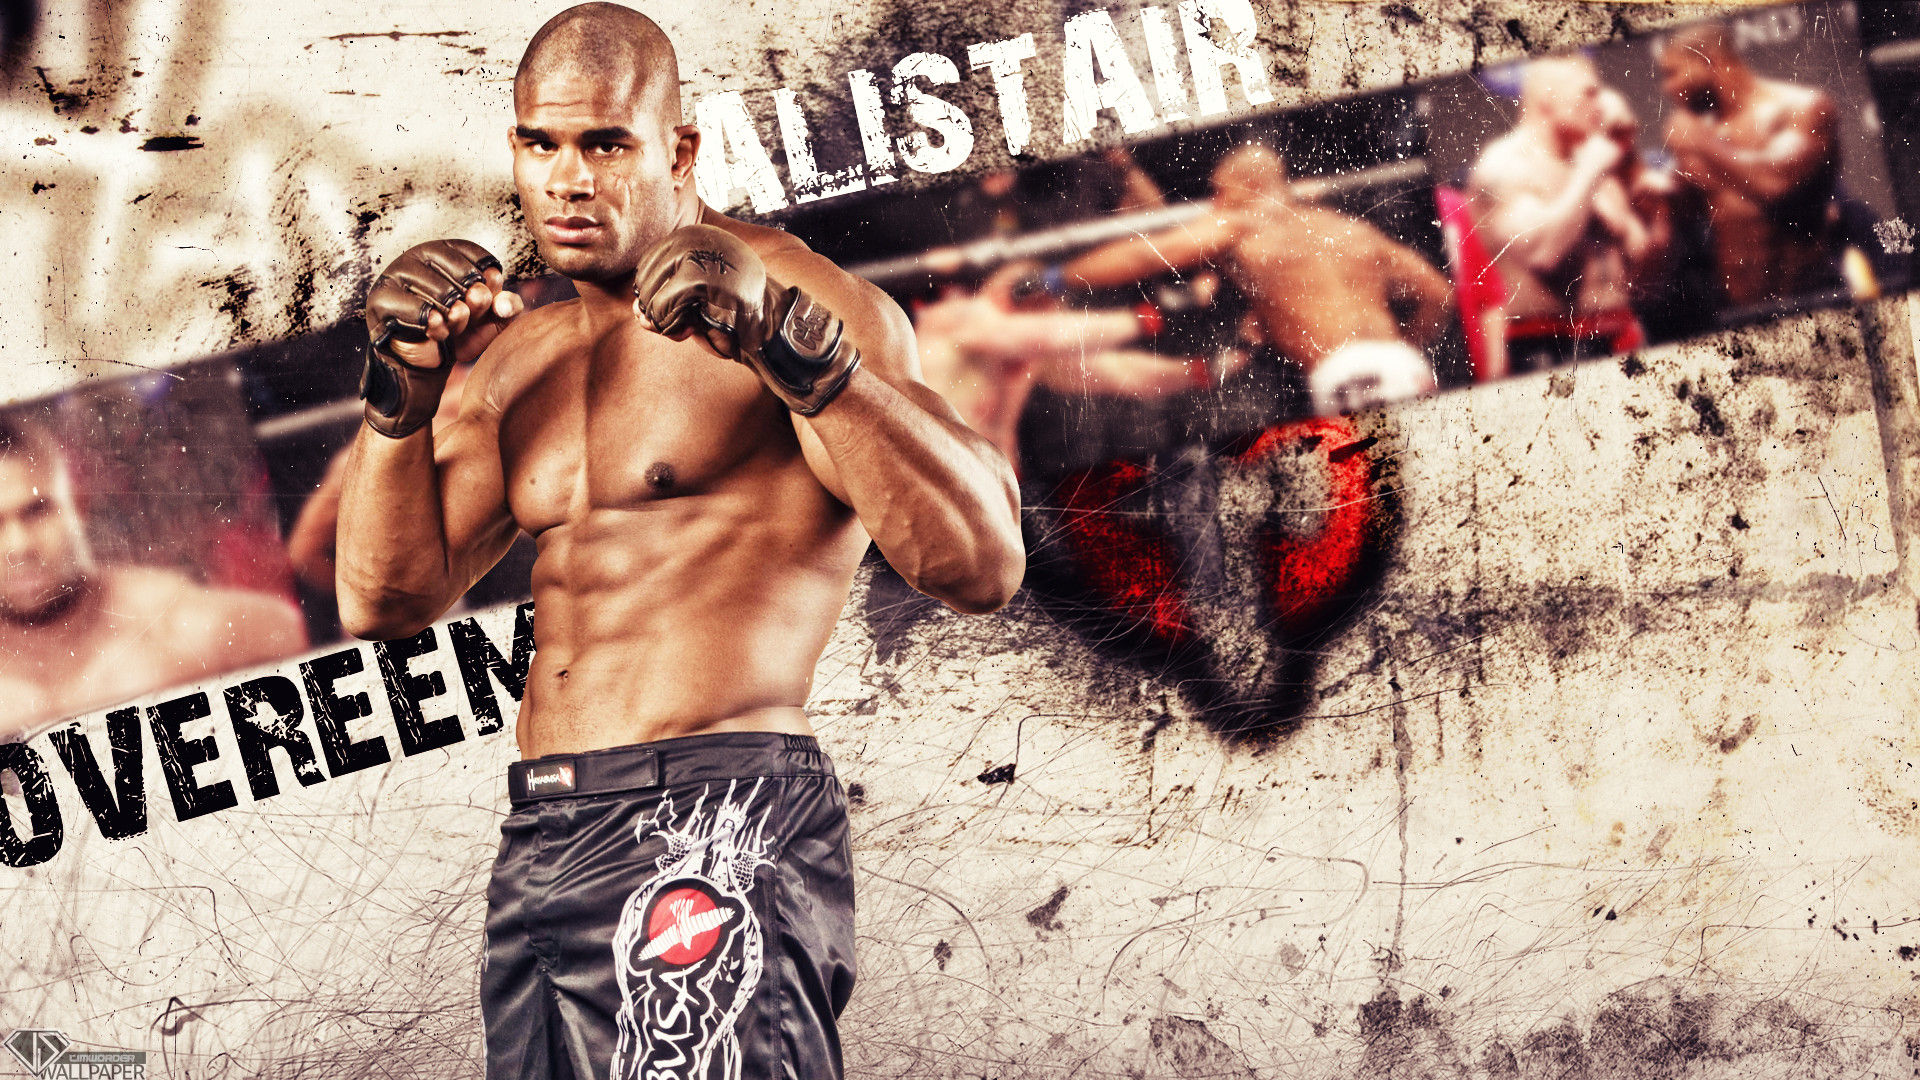 1920x1080 ... Fighter Wallpaper Gallery UFC Wallpapers - Wallpapers Browse ...